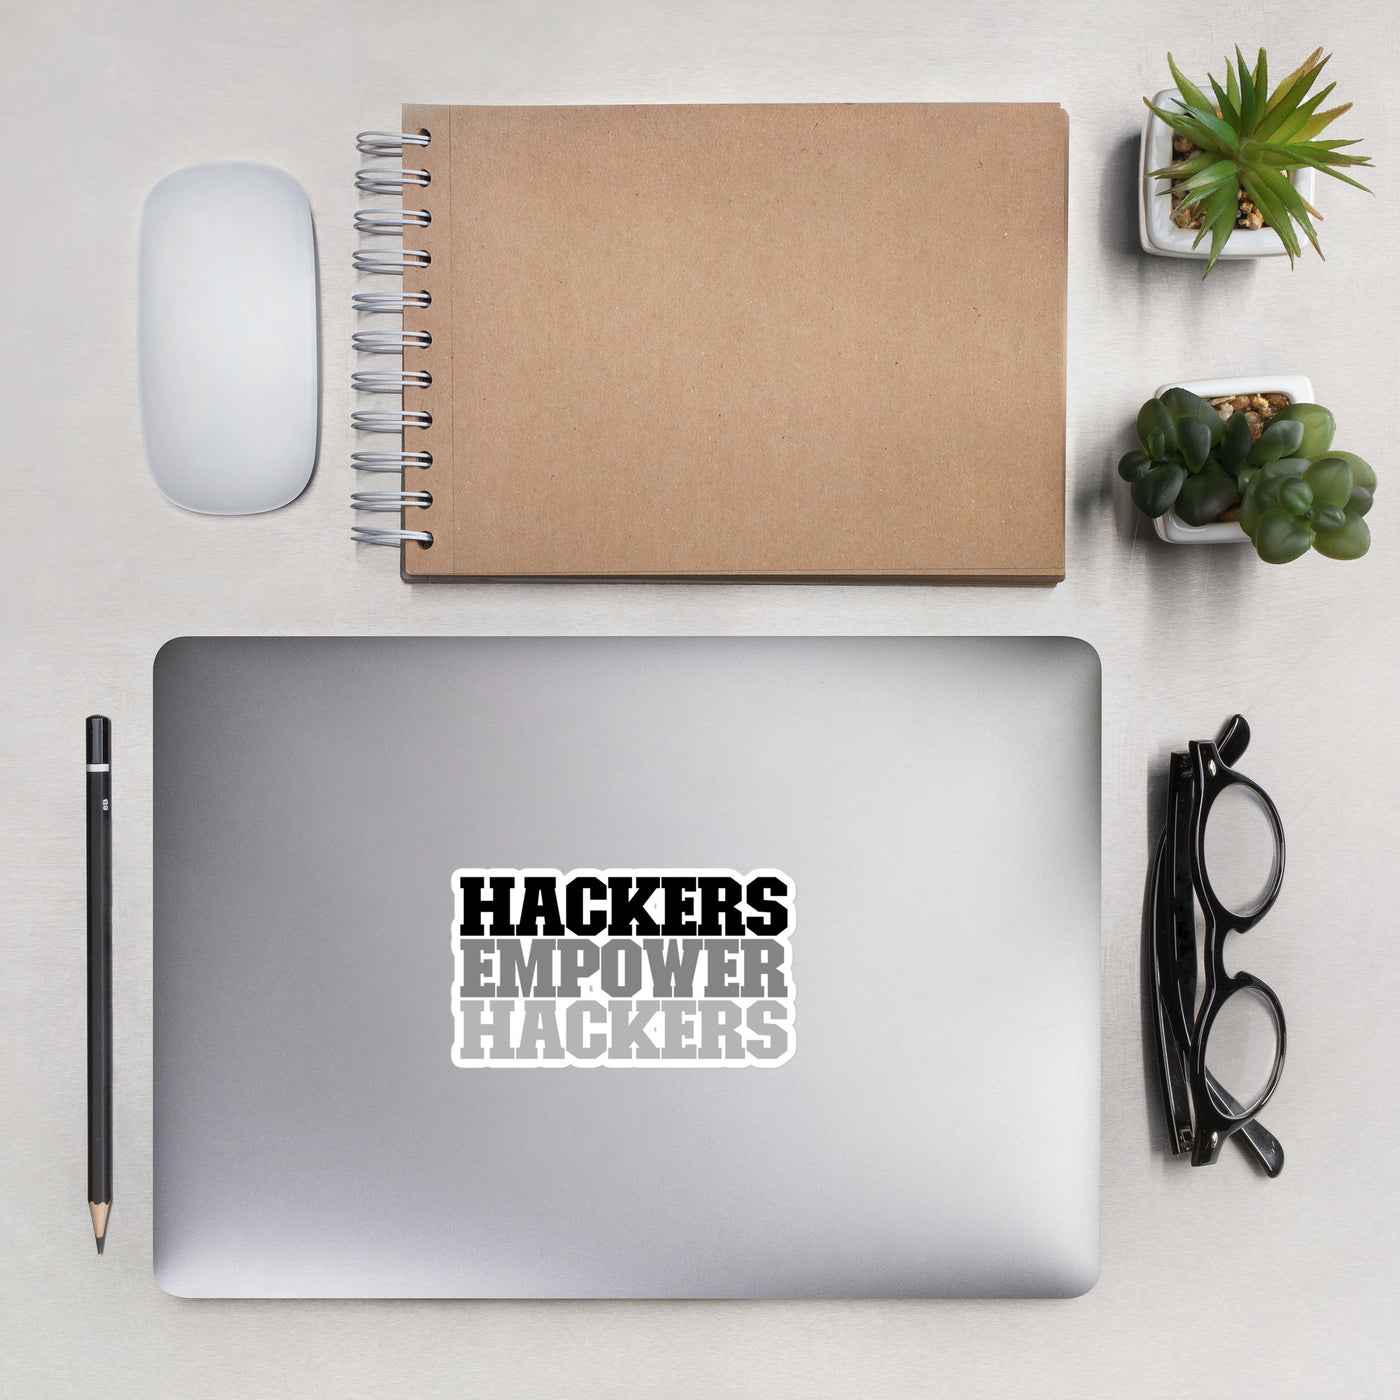 Hackers Empower Hackers V2 - Bubble-free stickers